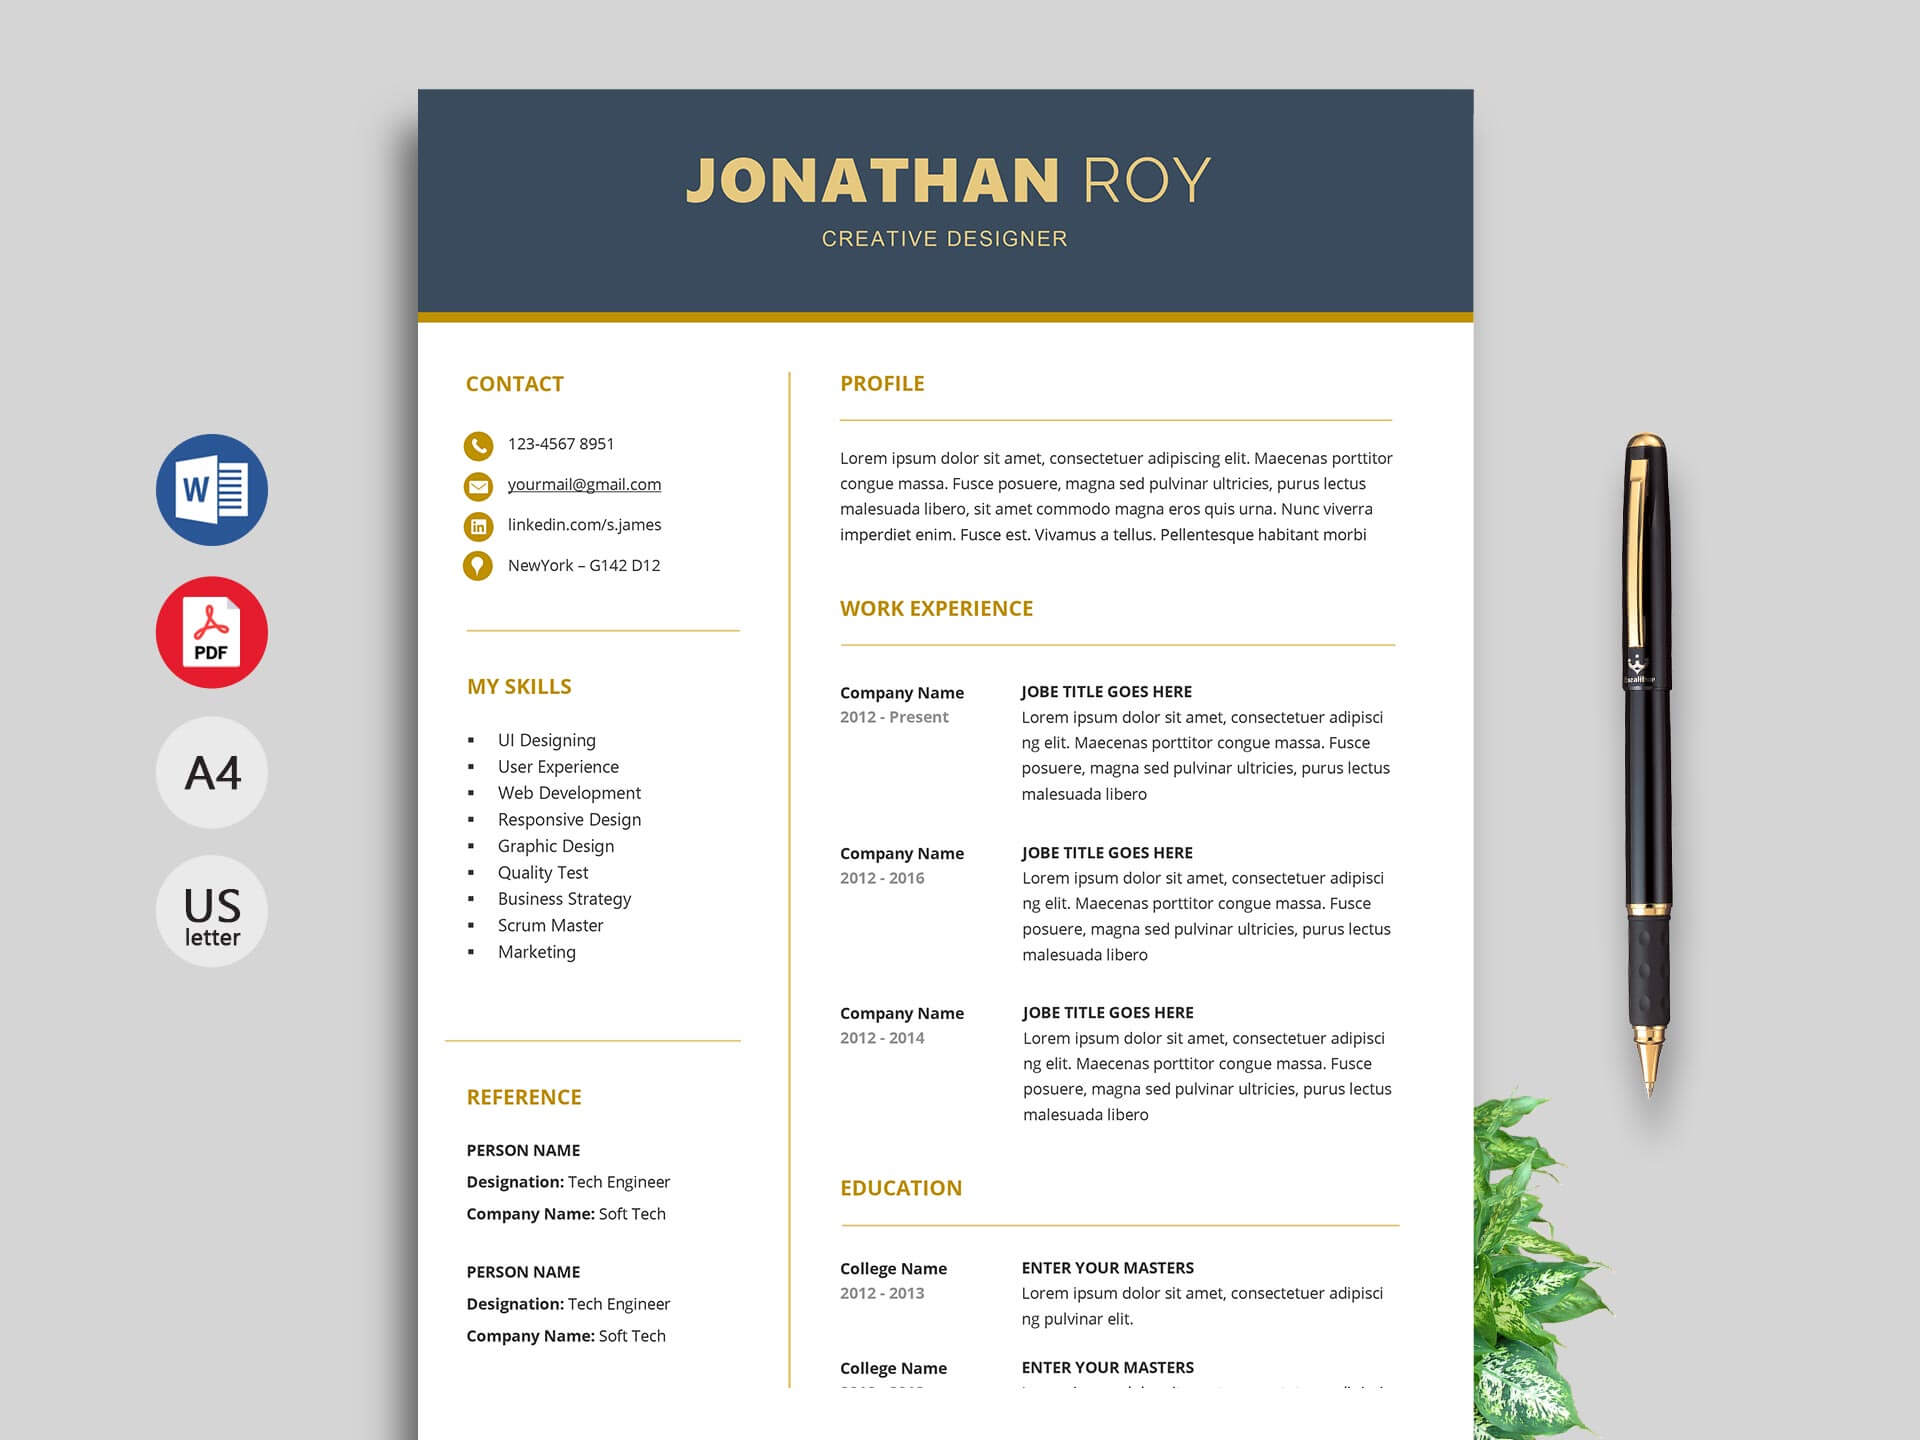 Free Resume & Cv Templates In Word Format 2020 | Resumekraft Throughout Free Downloadable Resume Templates For Word